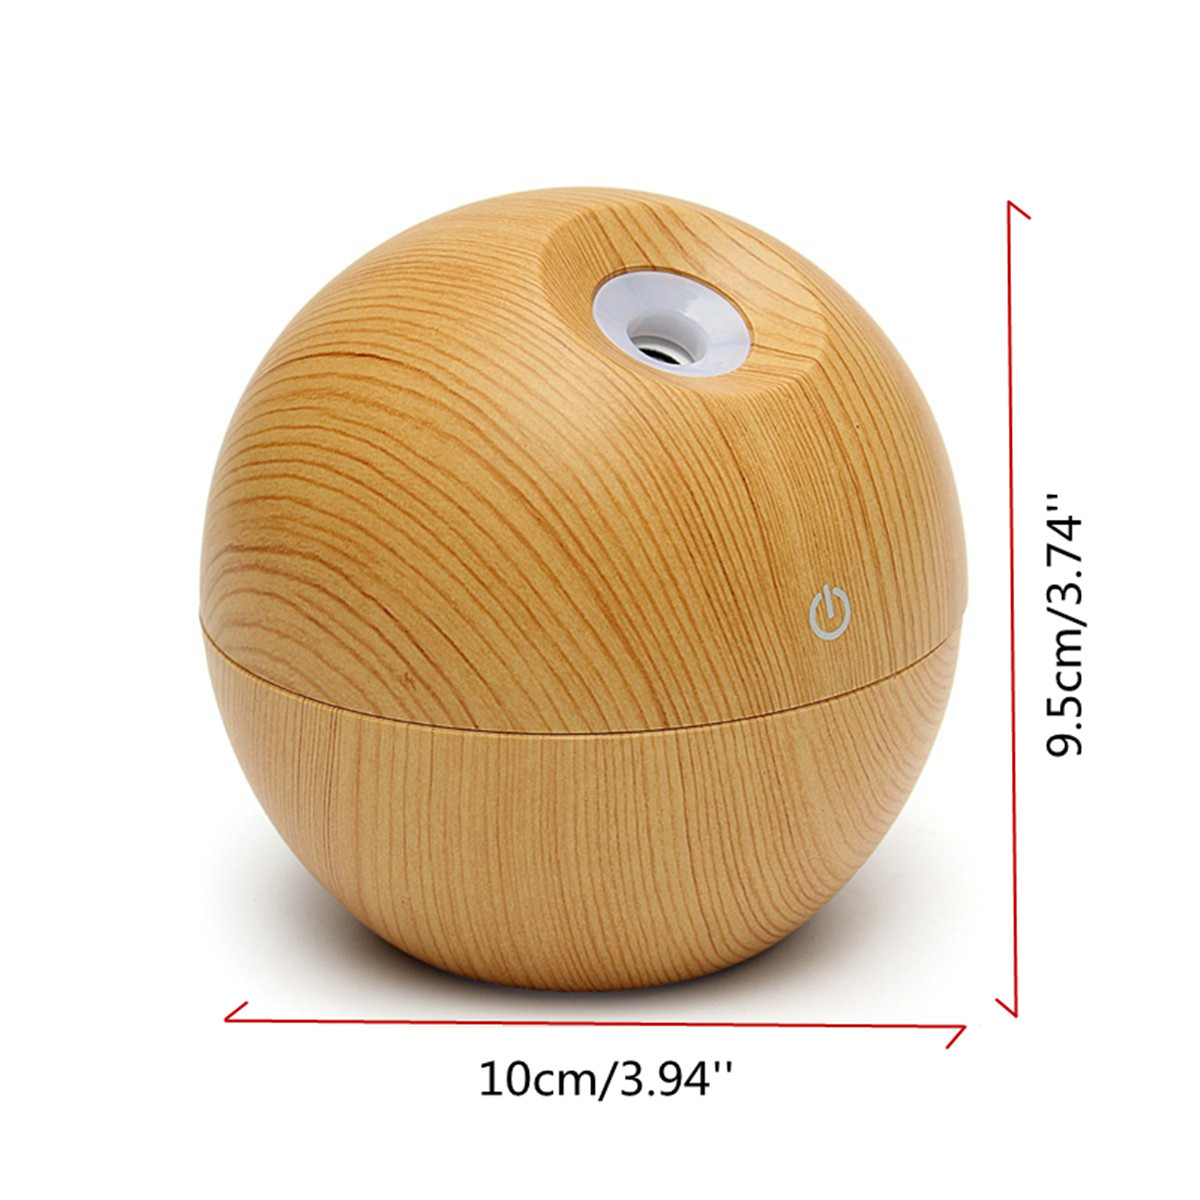 130ml-USB-Ultrasonic-Humidifier-Color-changing-LED-Aromatherapy-Essential-Oil-Diffuser-Aromatherapy-1098108